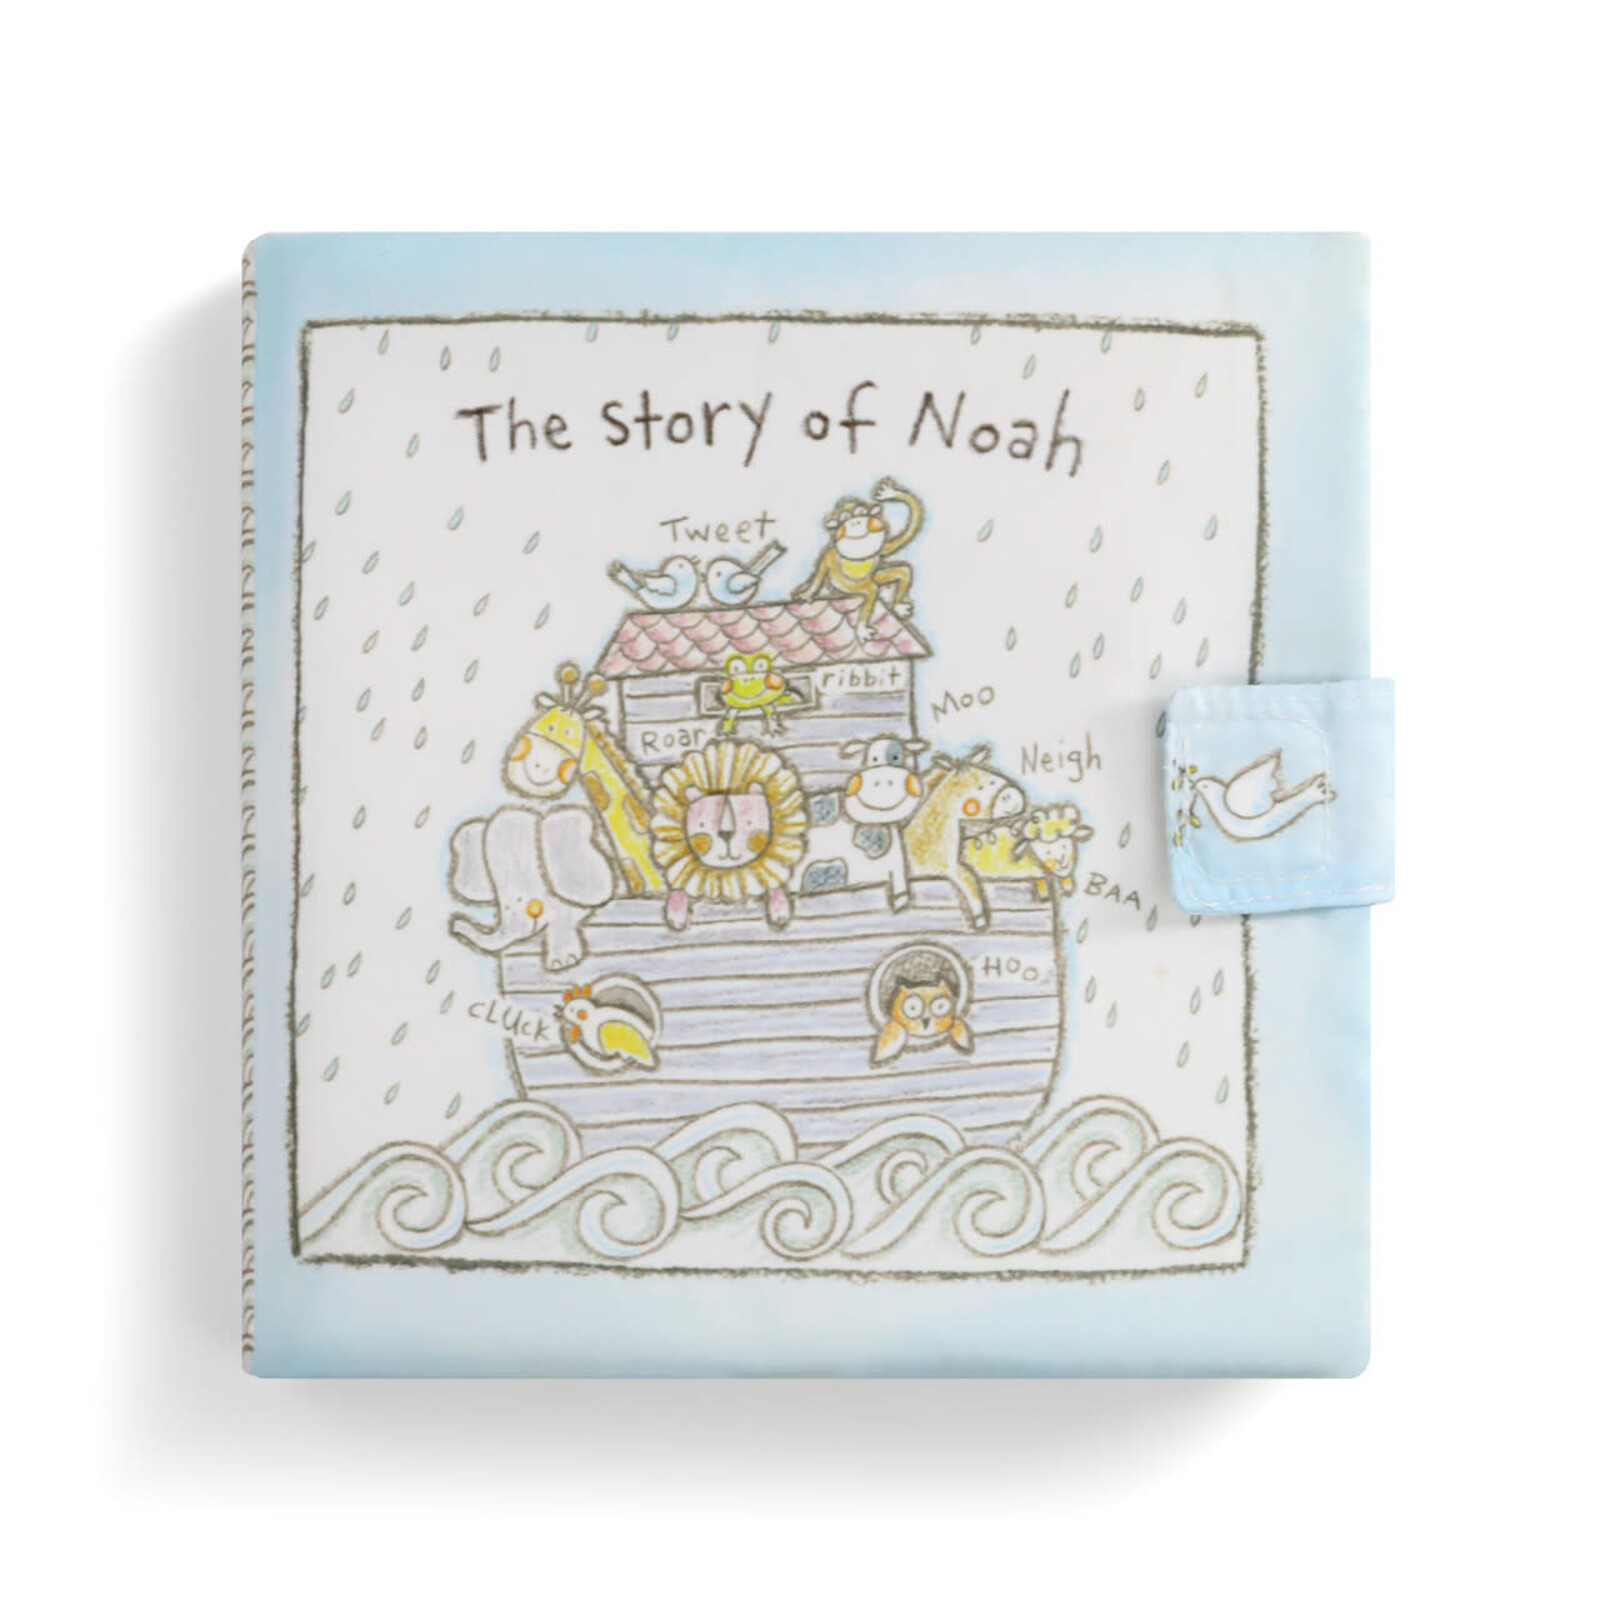 Demdaco The Story of Noah Soft Book  5004700791 loading=